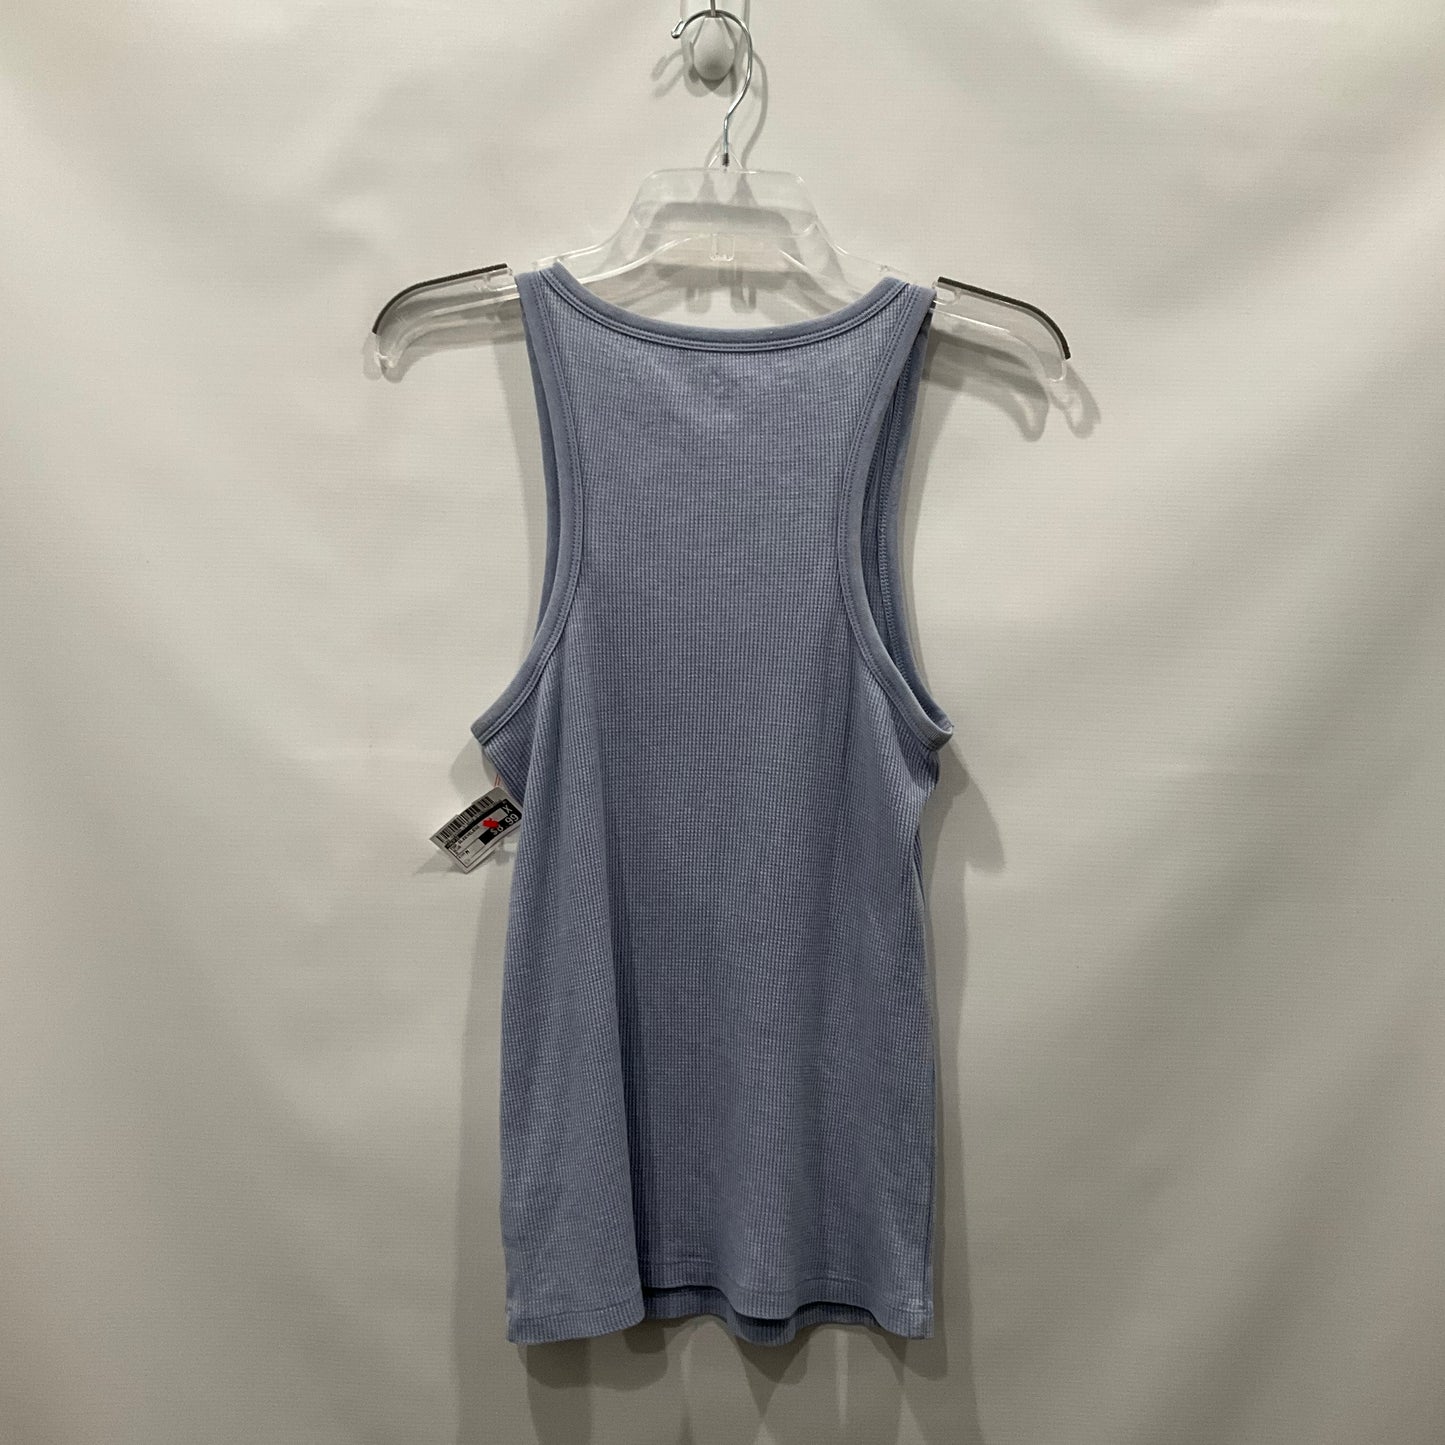 Top Sleeveless By Aerie  Size: M